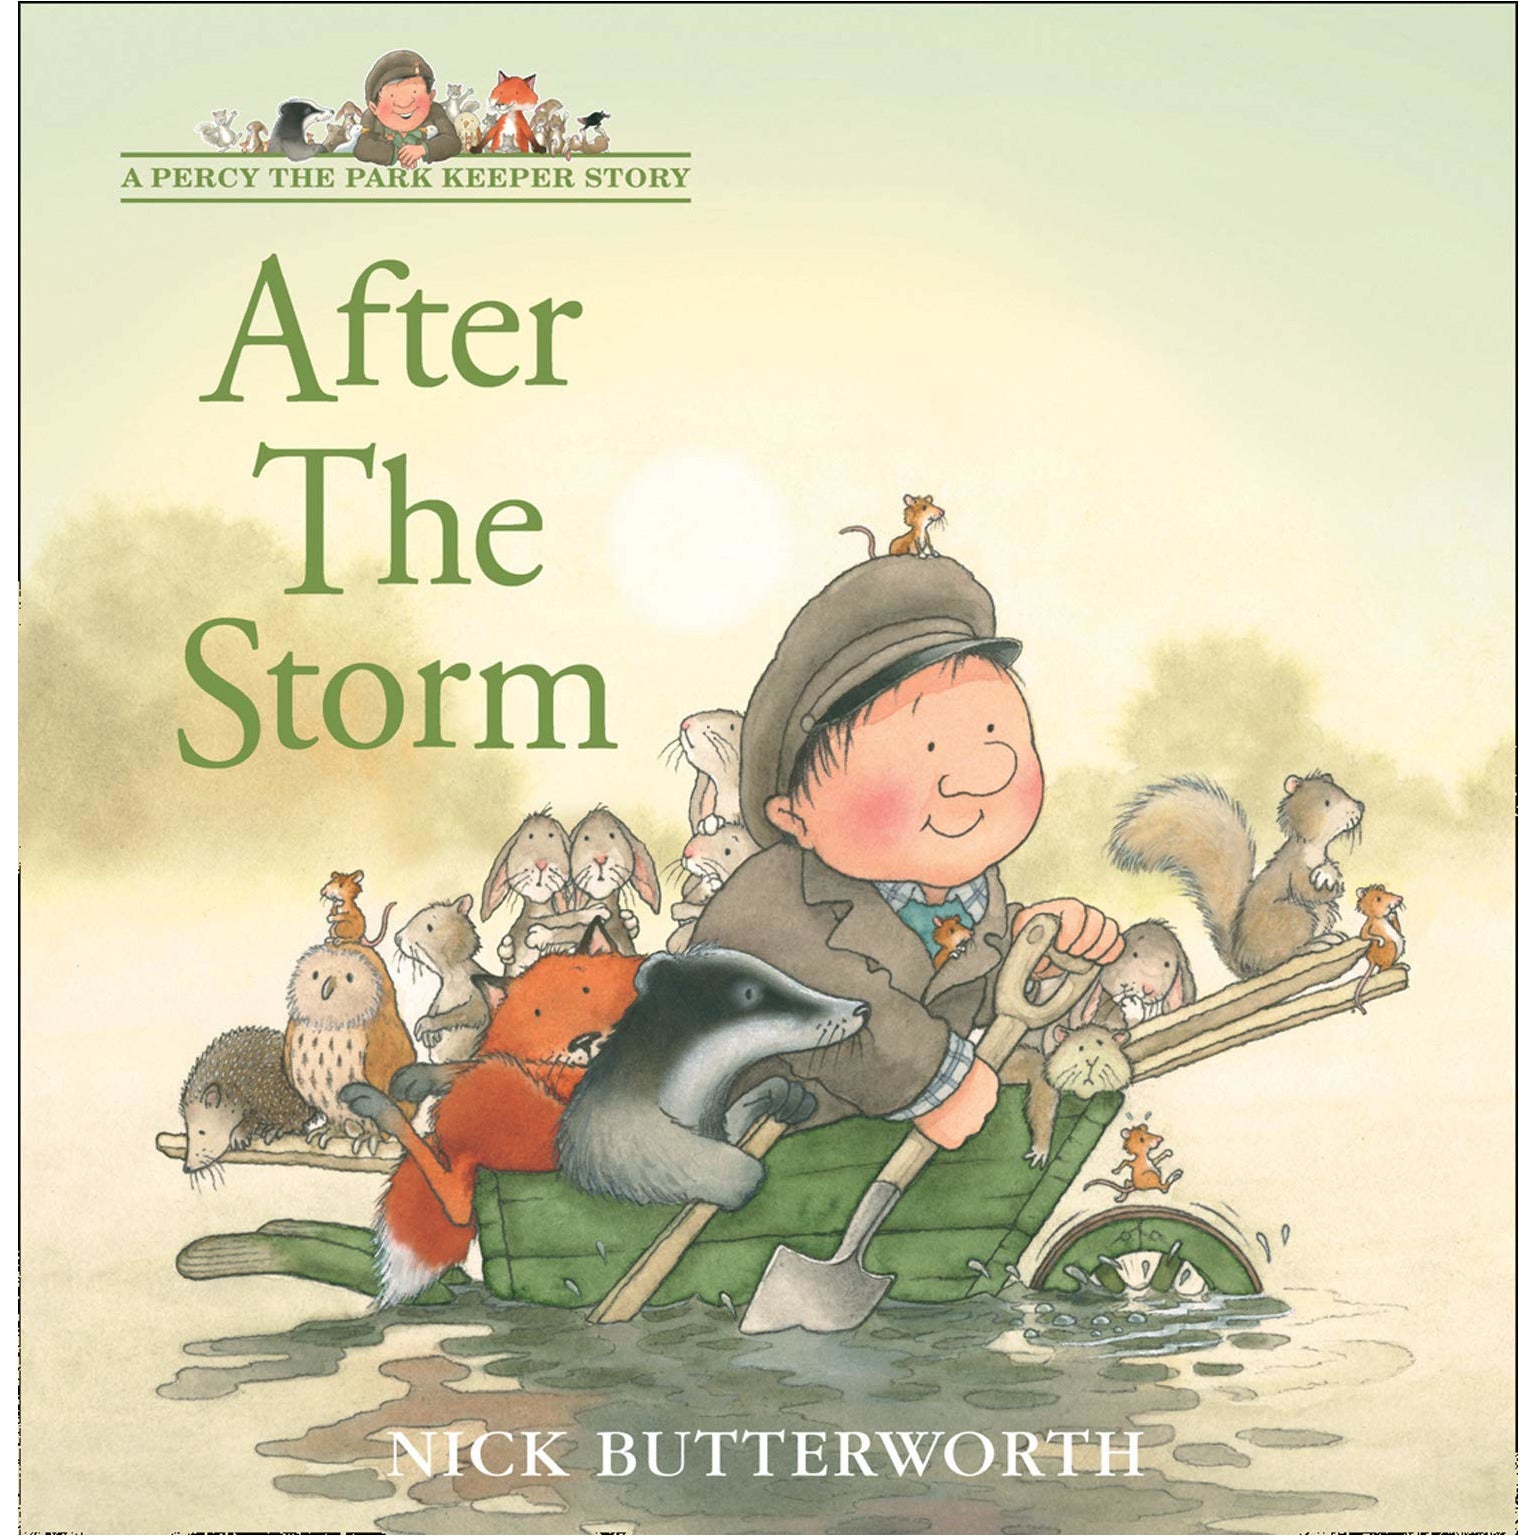 After The Storm - Nick Butterworth